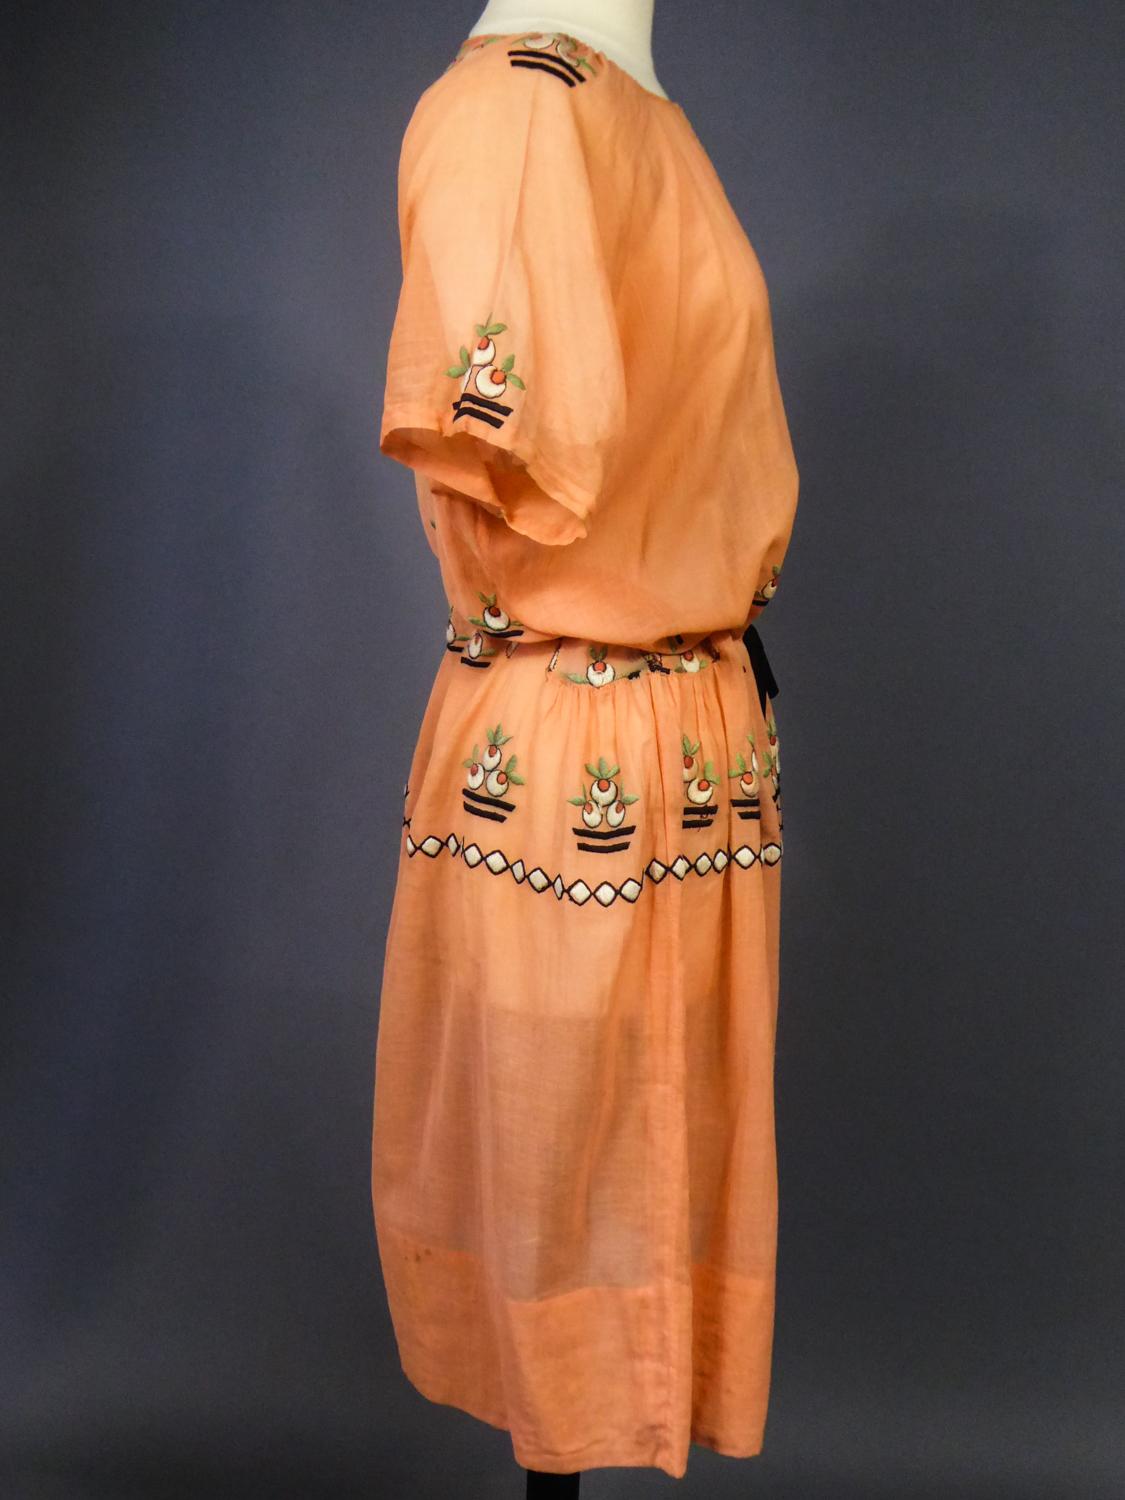 A Seaside Embroidered Cotton Dress in the style of Atelier Martine Circa 1920 For Sale 3